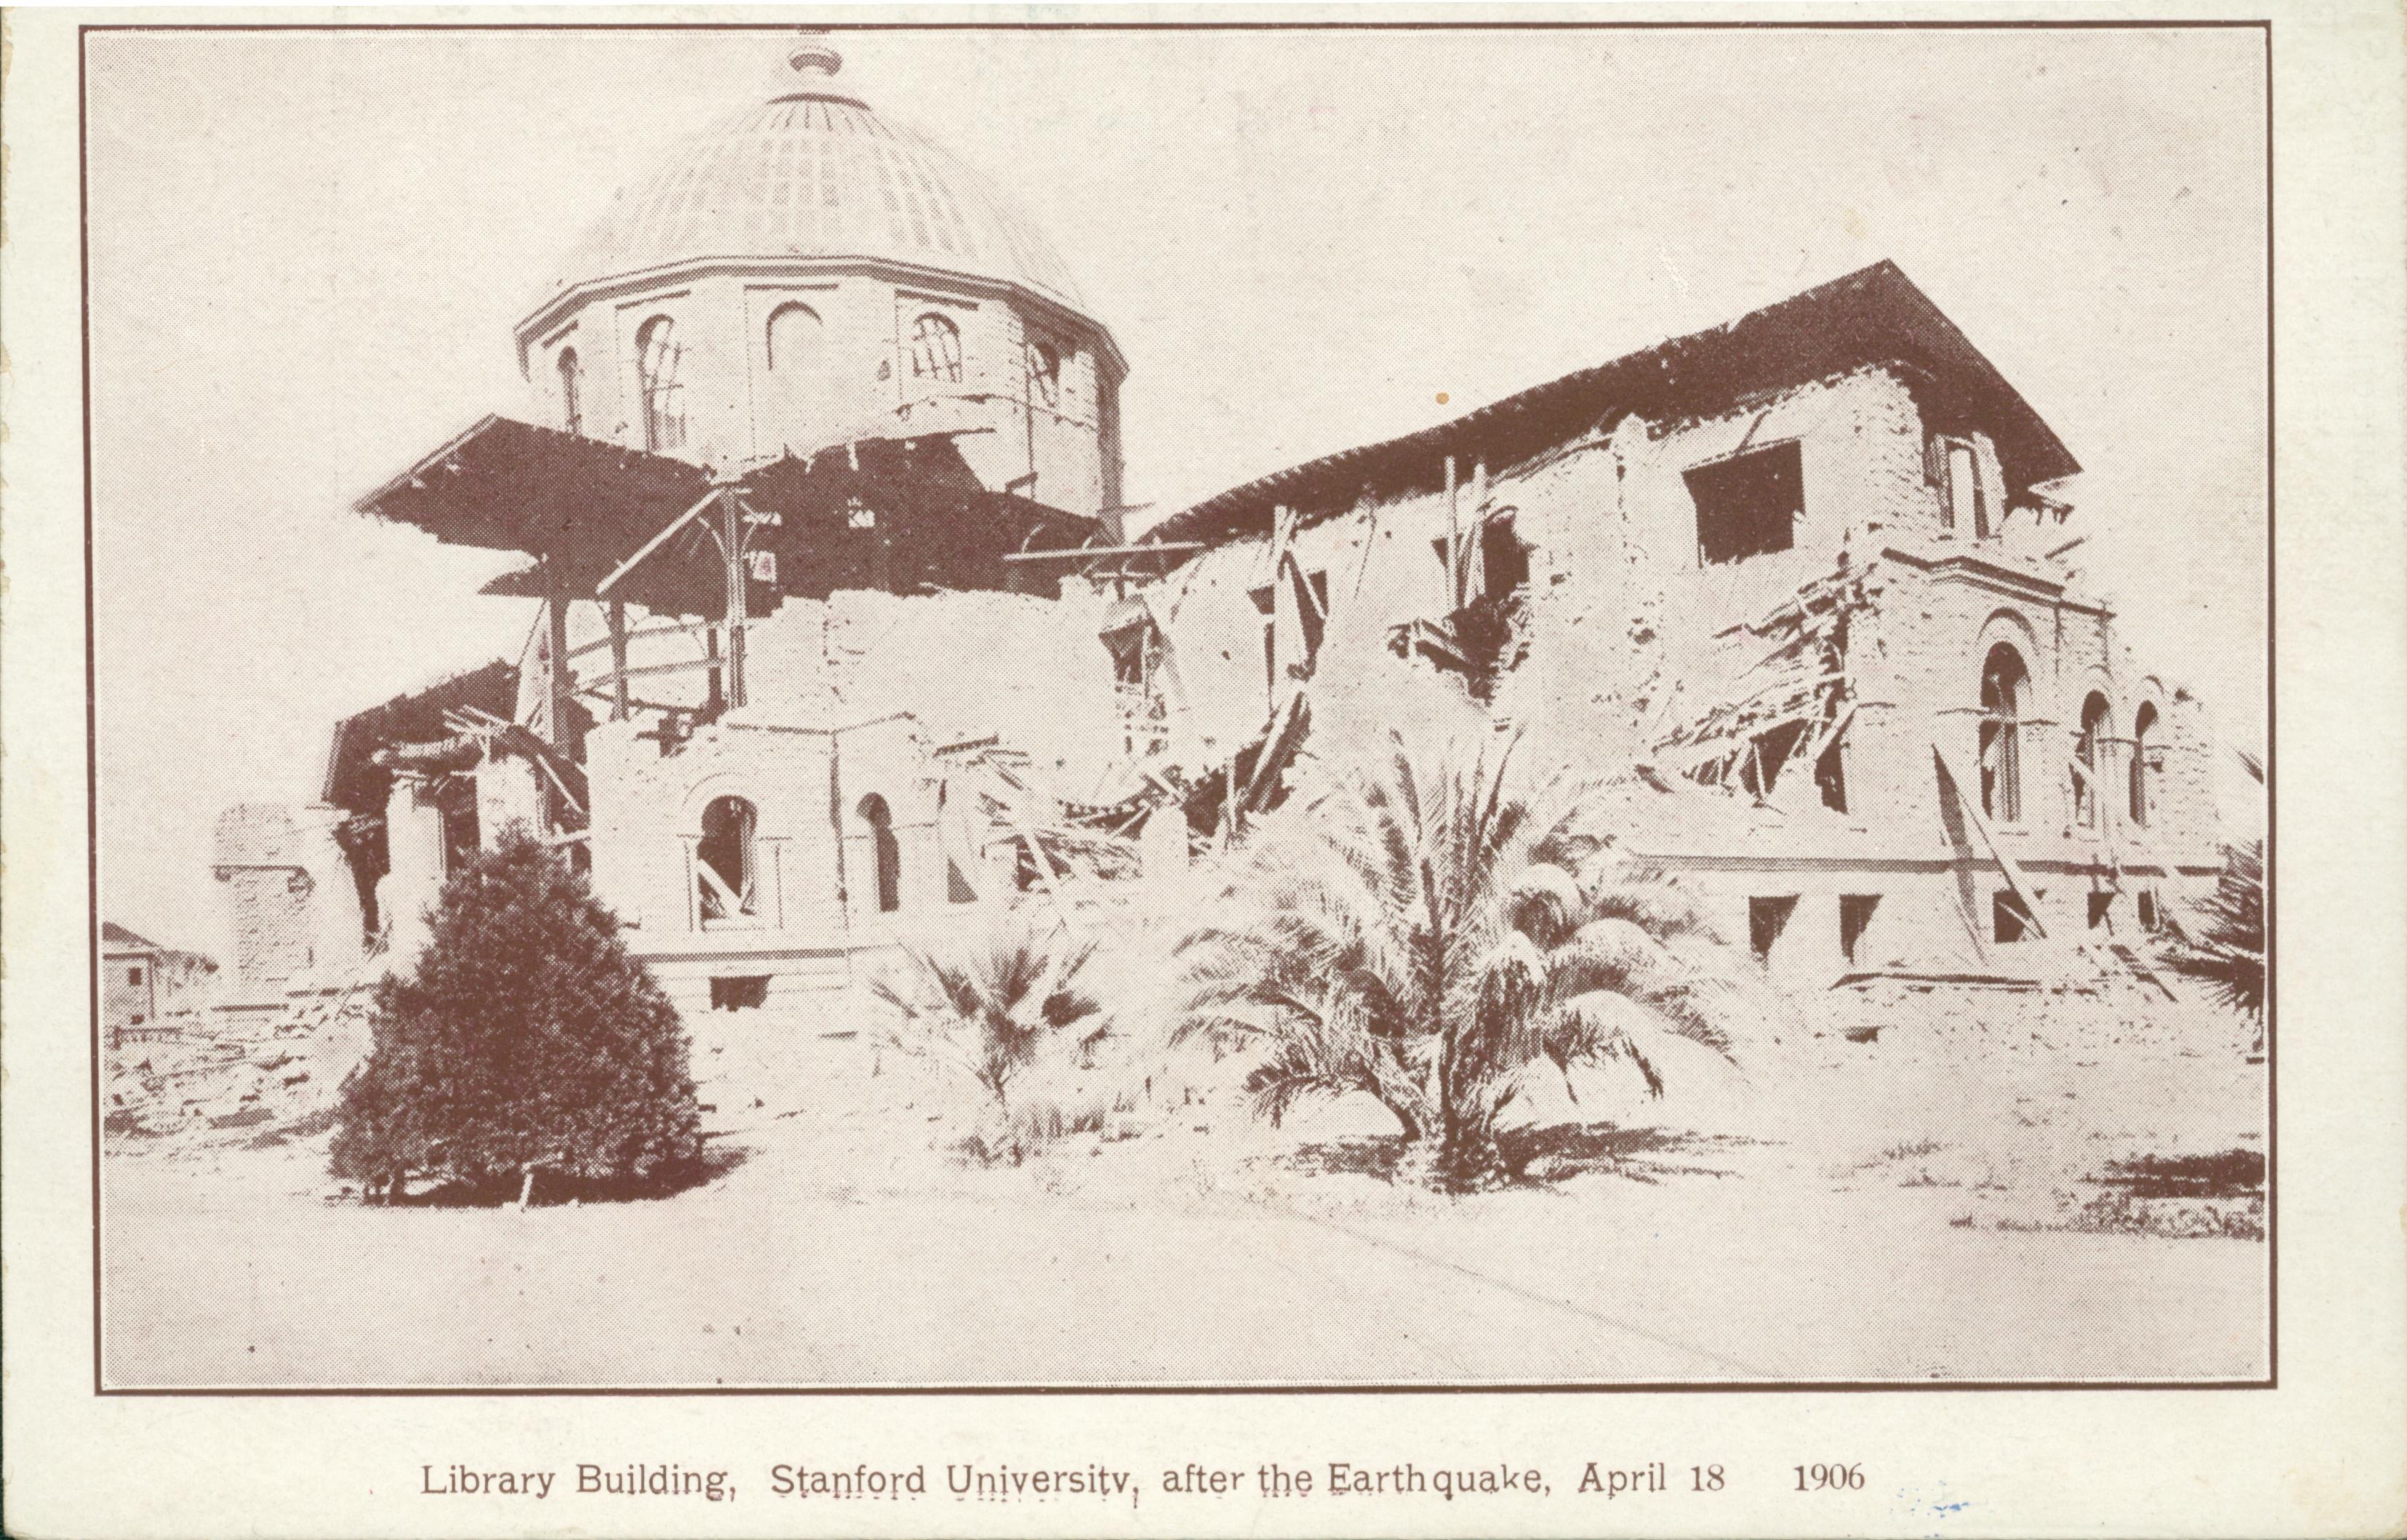 View of the destroyed exterior of the library after the destructive earthquake of 1906.